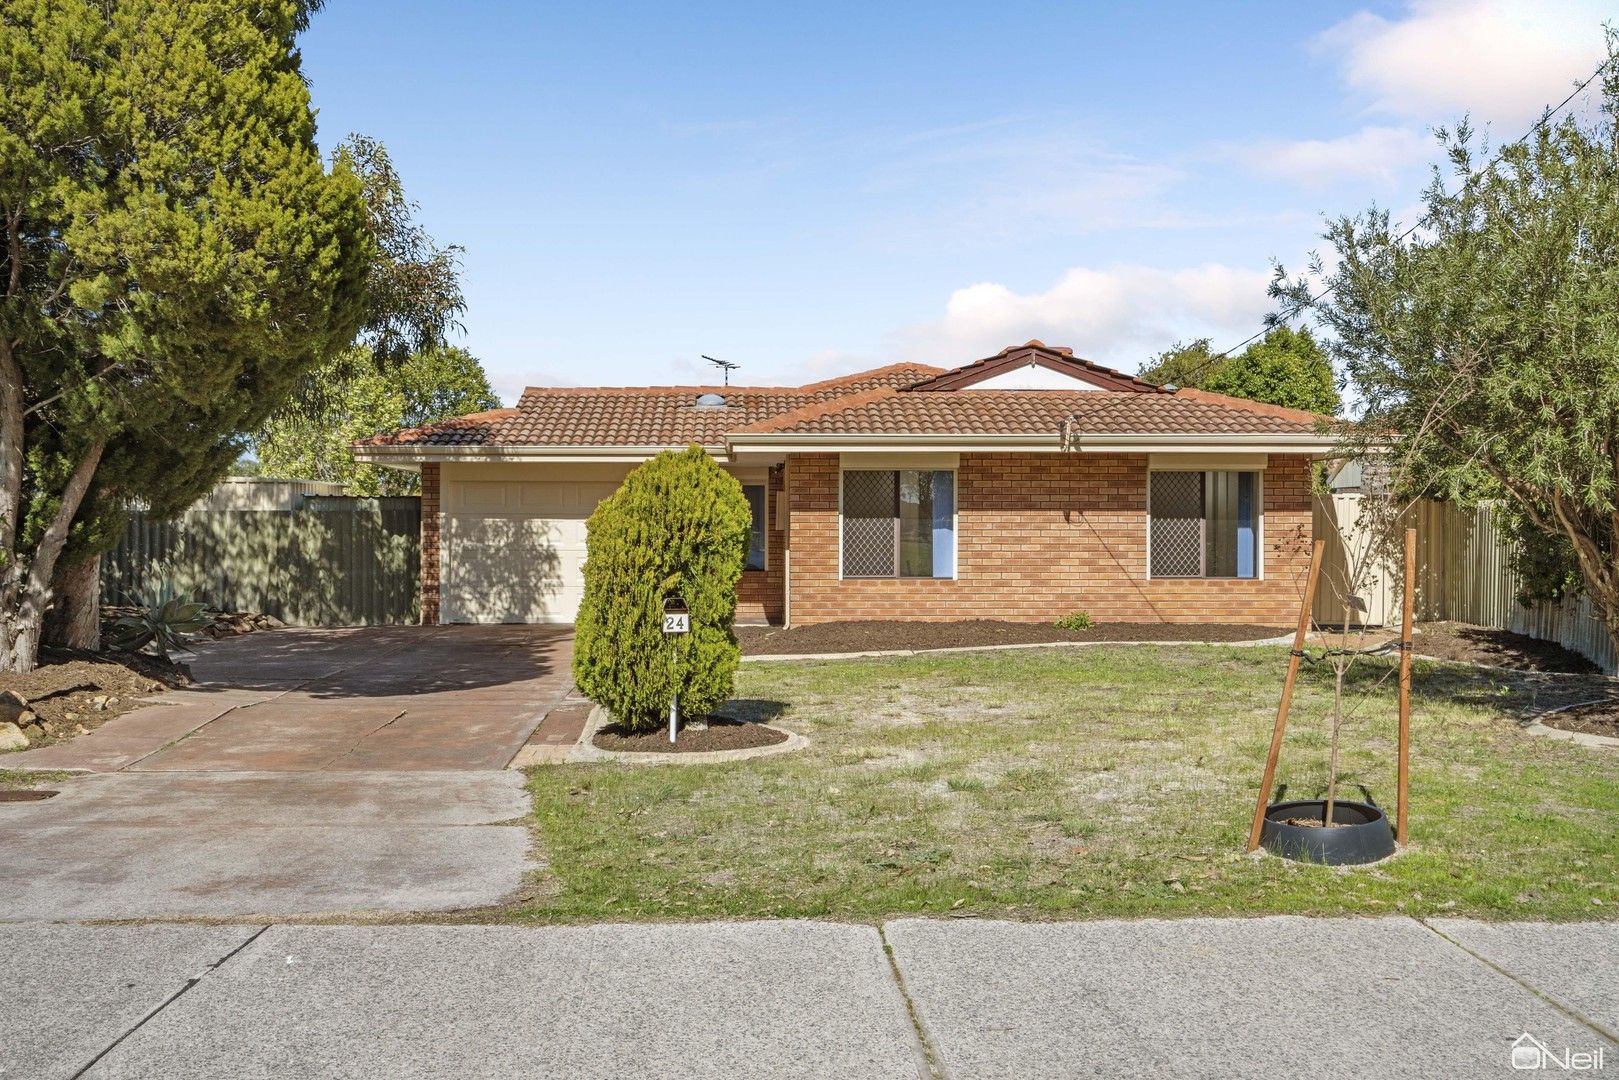 3 bedrooms House in 24 Strawberry Drive SEVILLE GROVE WA, 6112